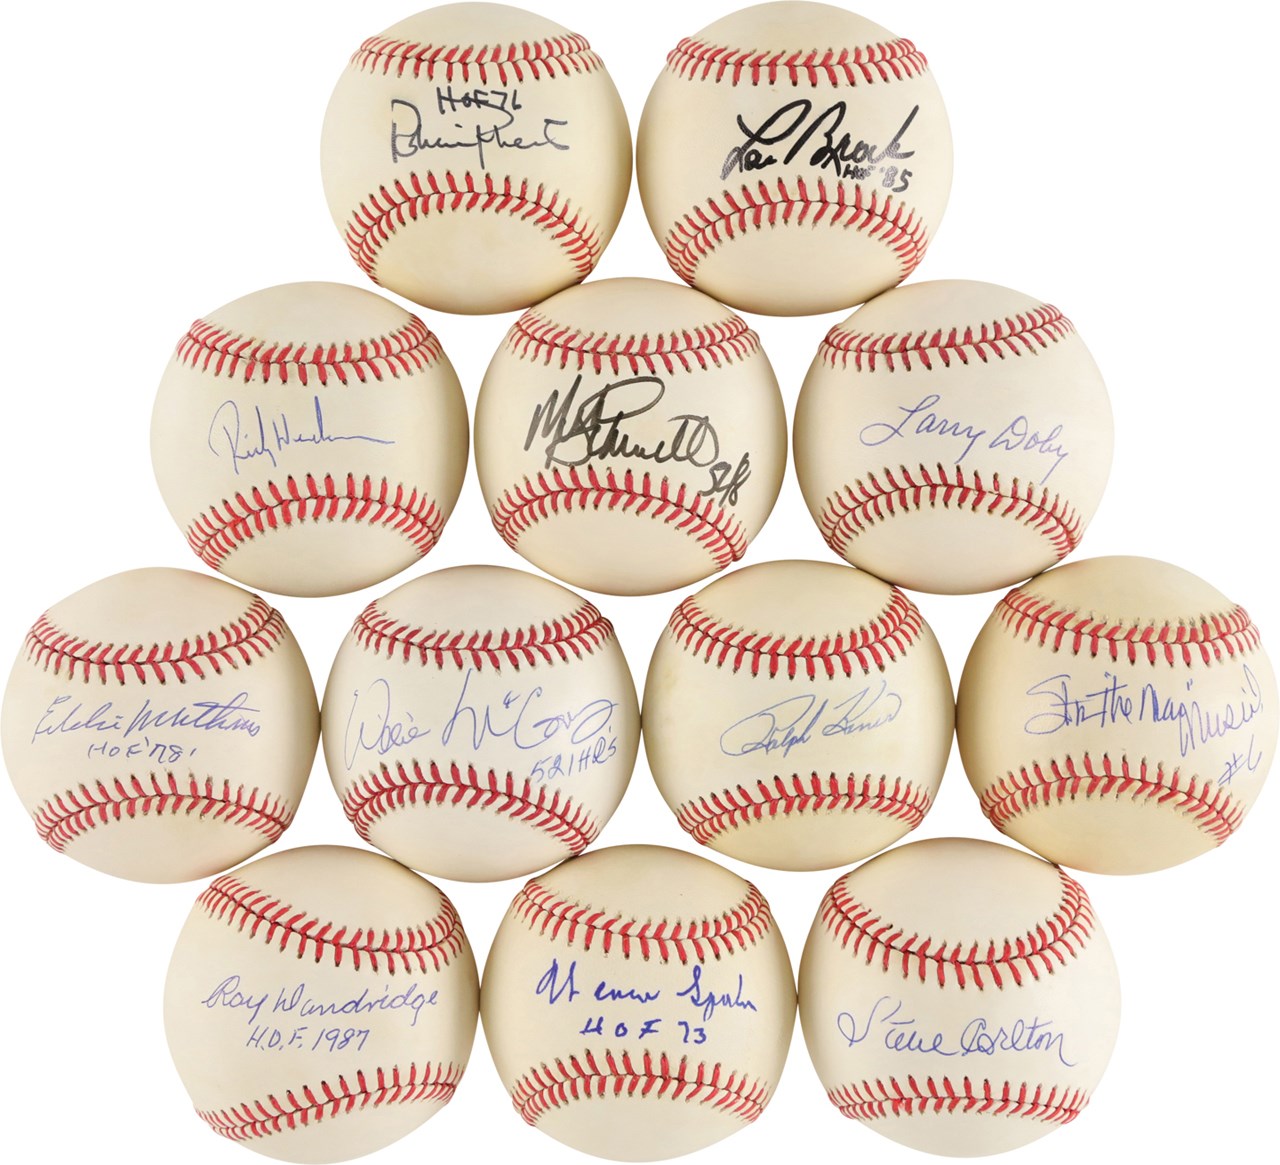 Enormous Hall of Fame Single Signed Baseball Collection (81)